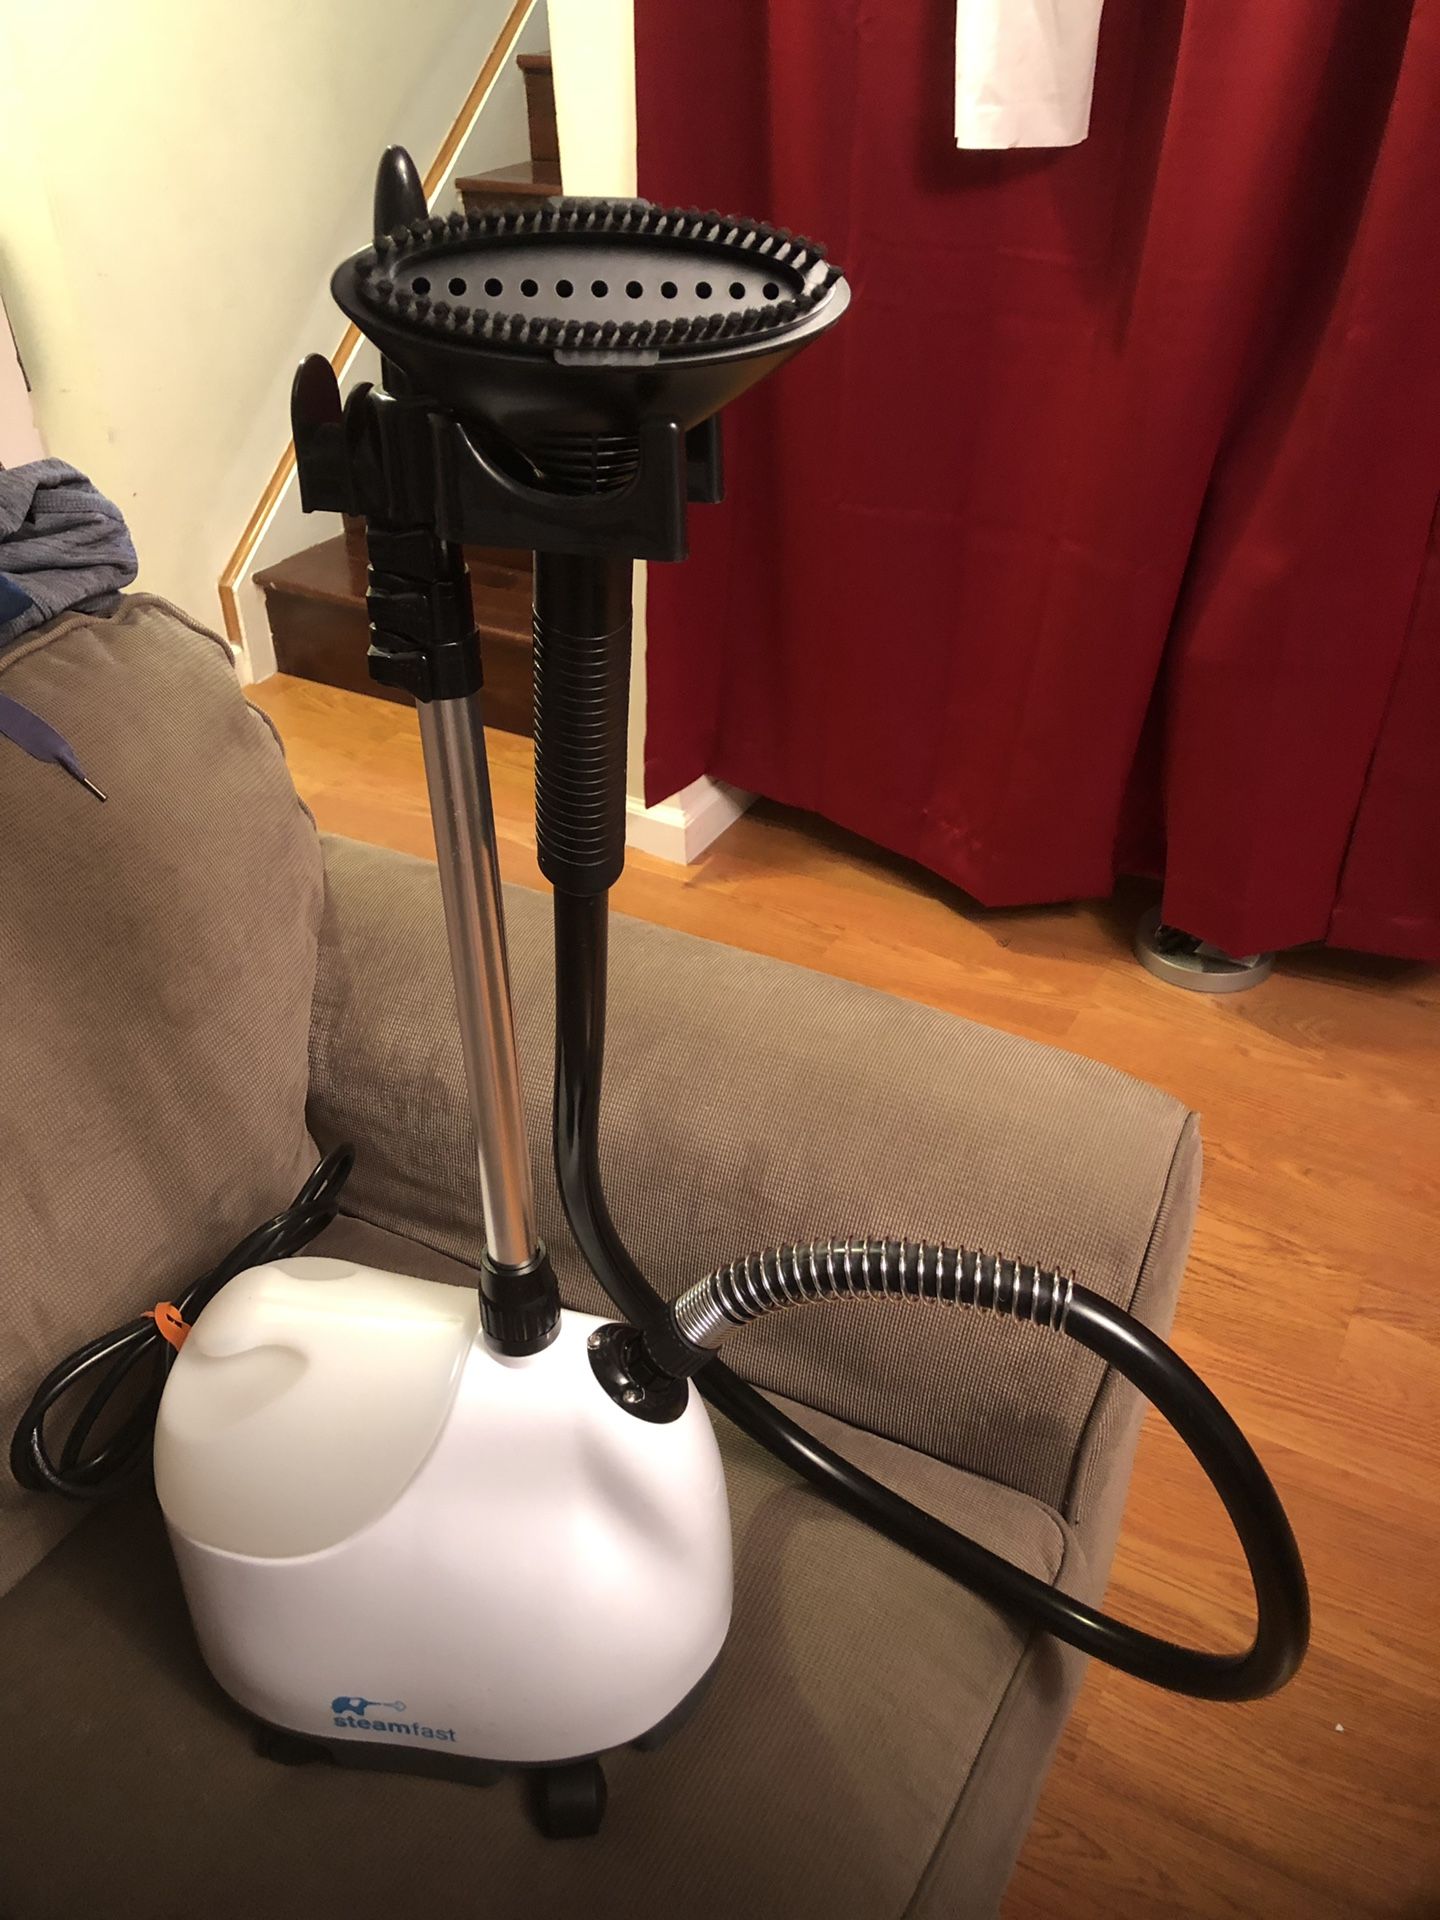 Steam Fast Clothing Steamer$30